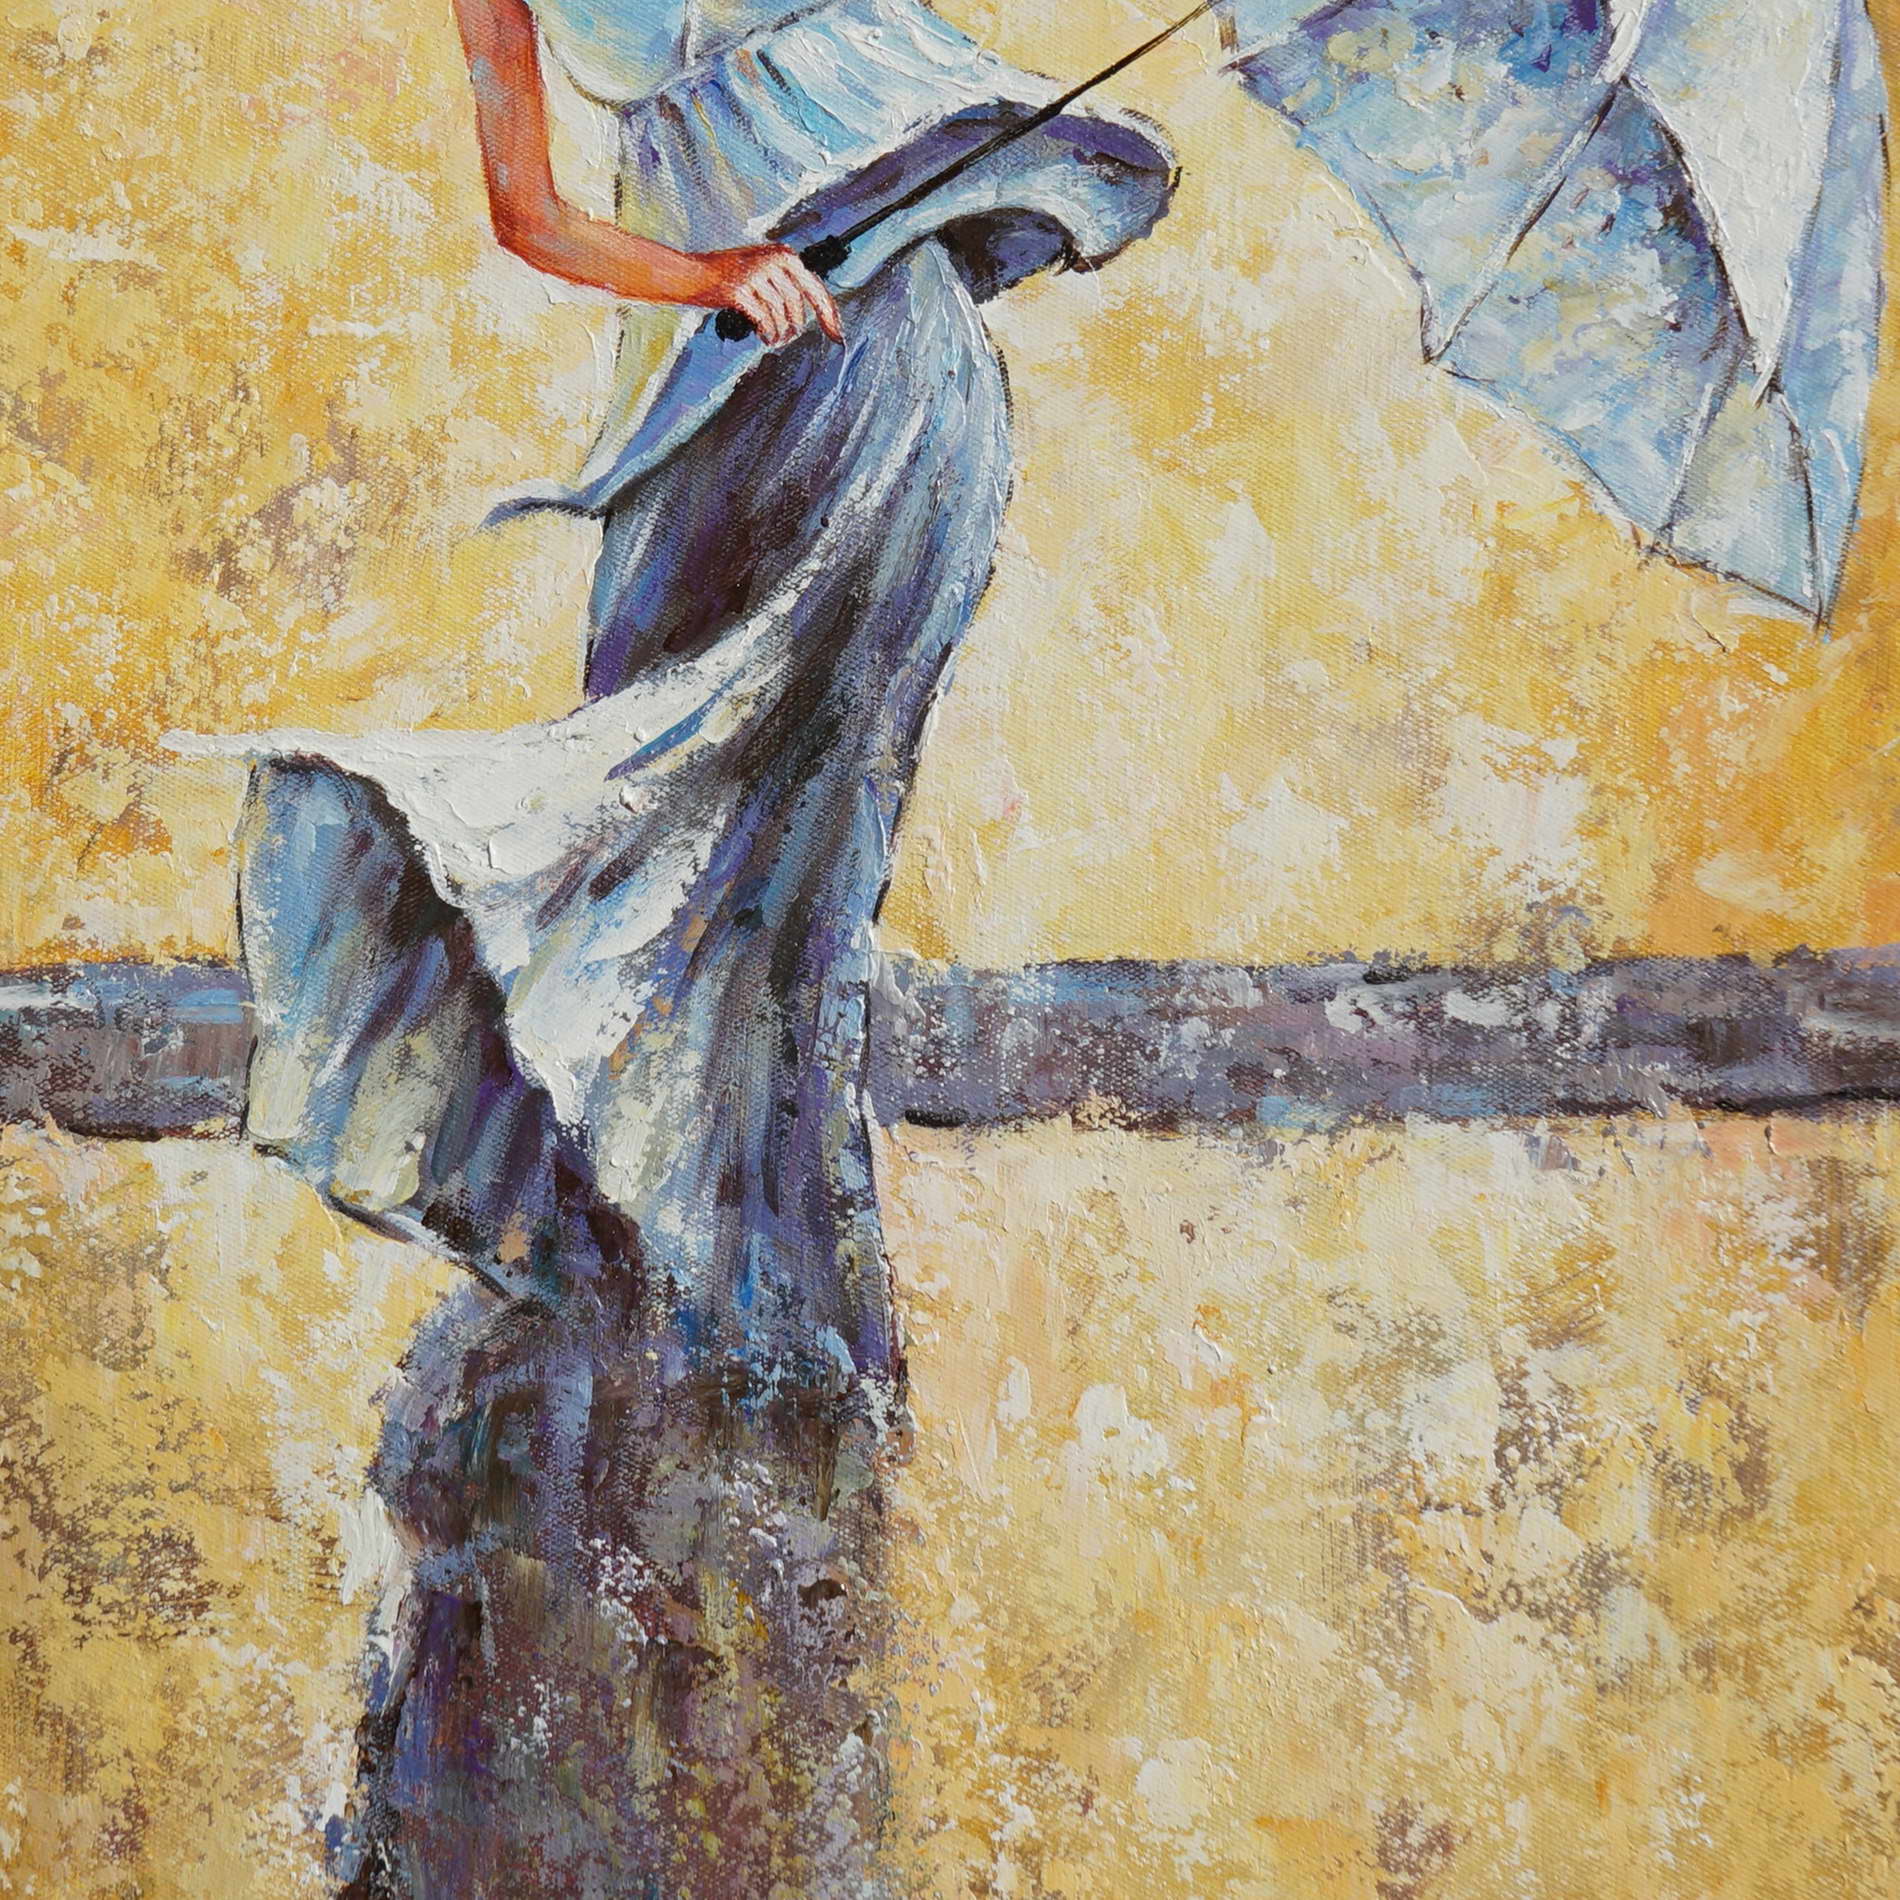 Hand painted Woman with Umbrella 50x70cm